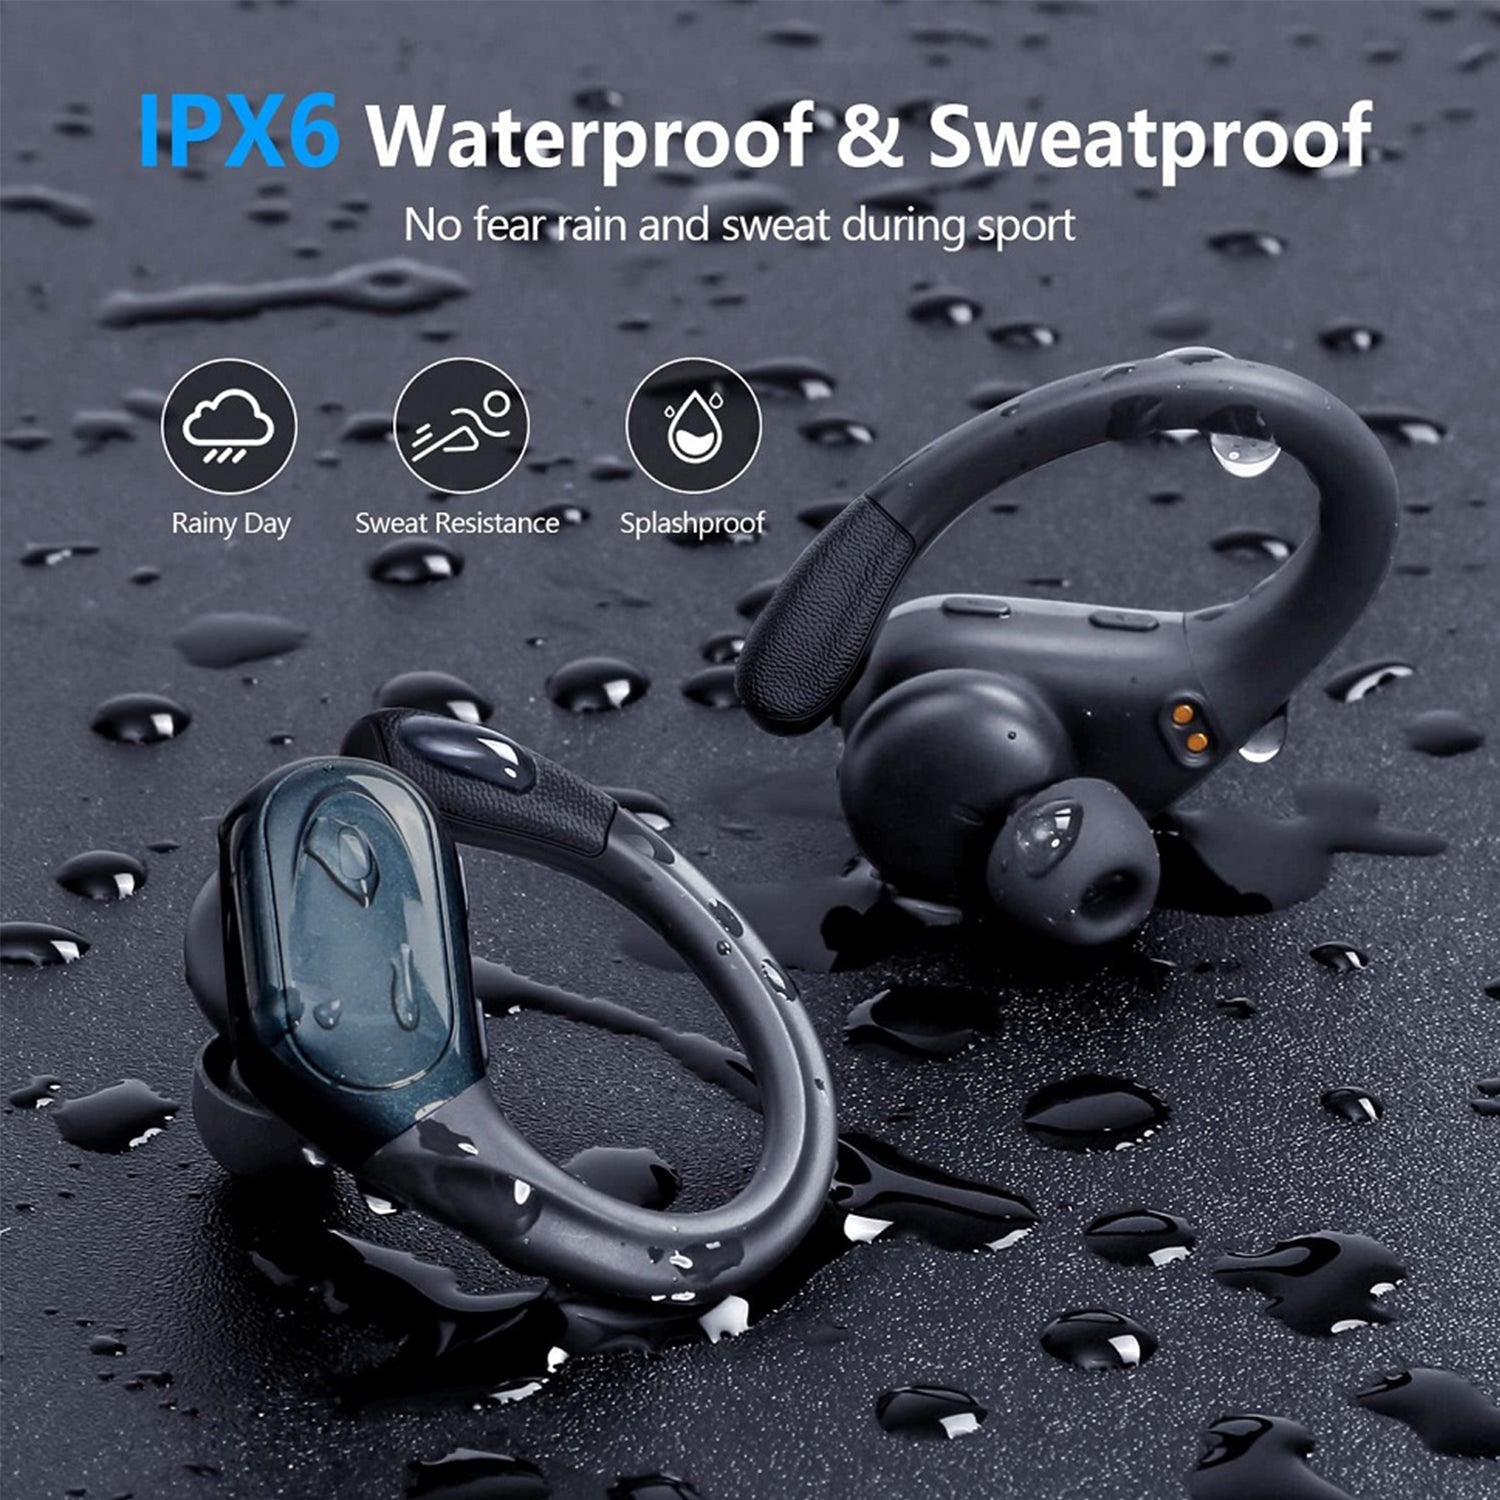 Wireless Bluetooth Headphones 8Hrs Playtime HD Stereo ,Audio Digital LED Display ,Over-Ear Earphones With Earhook Waterproof With Mic For Sport Running Workout Headphones